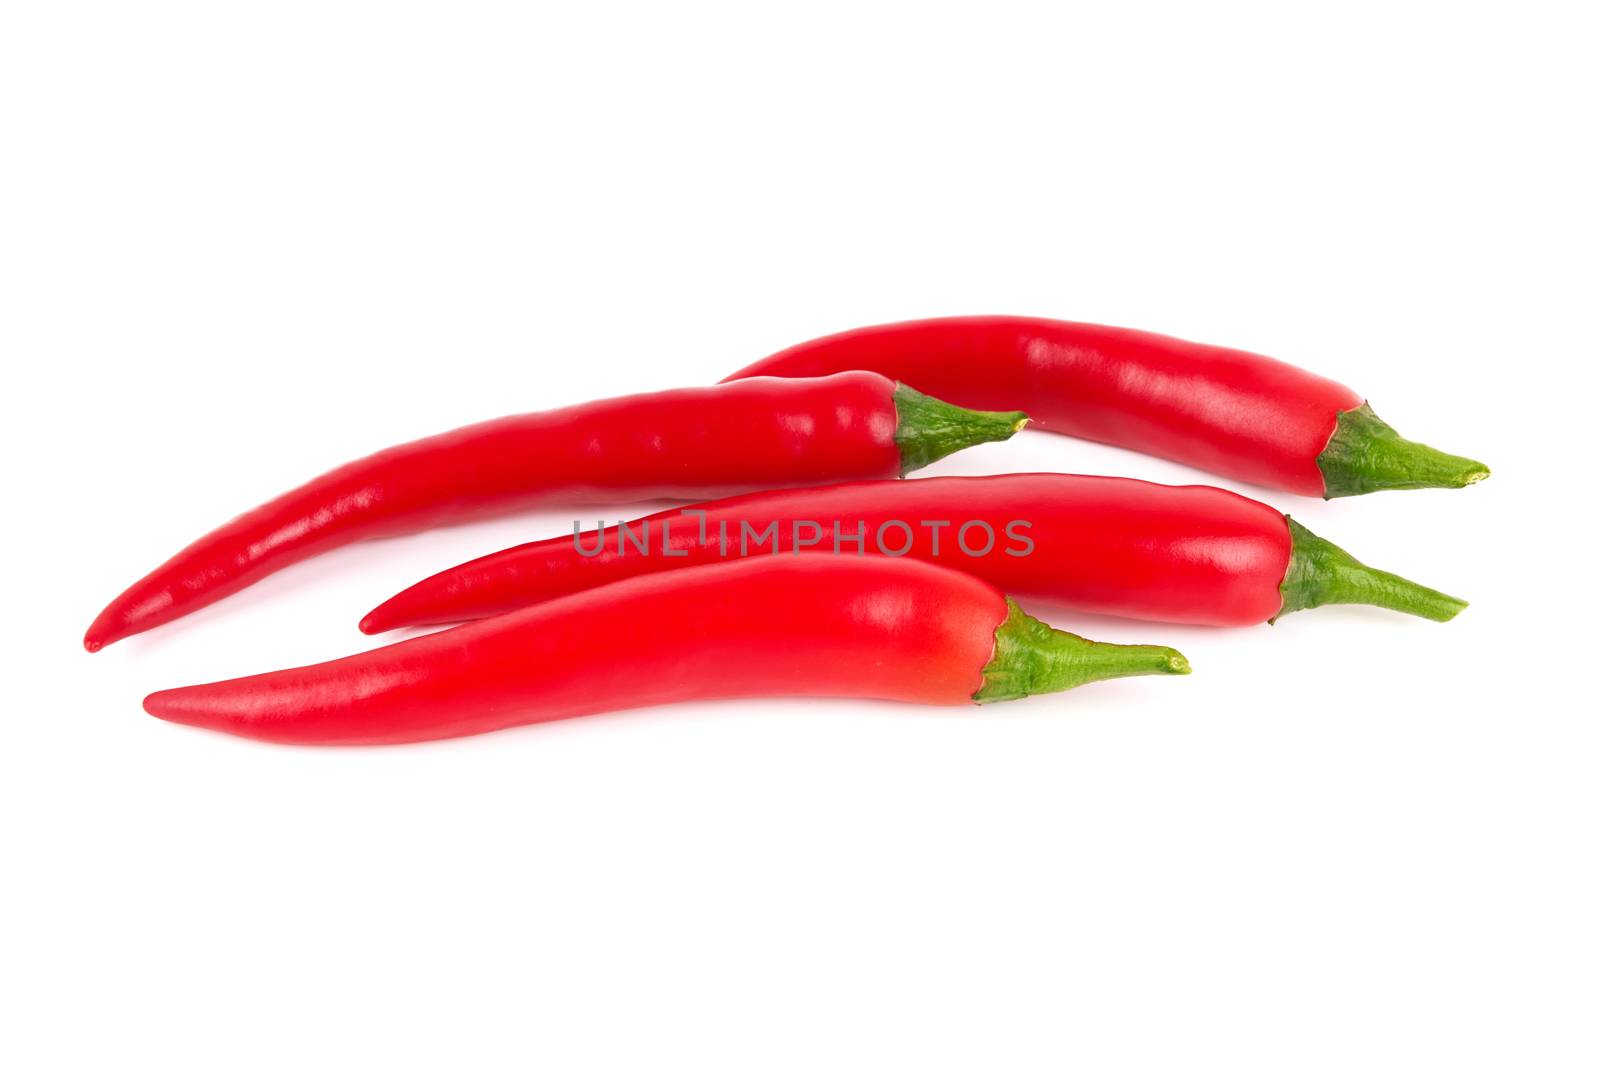 Red chili pepper isolate on white background